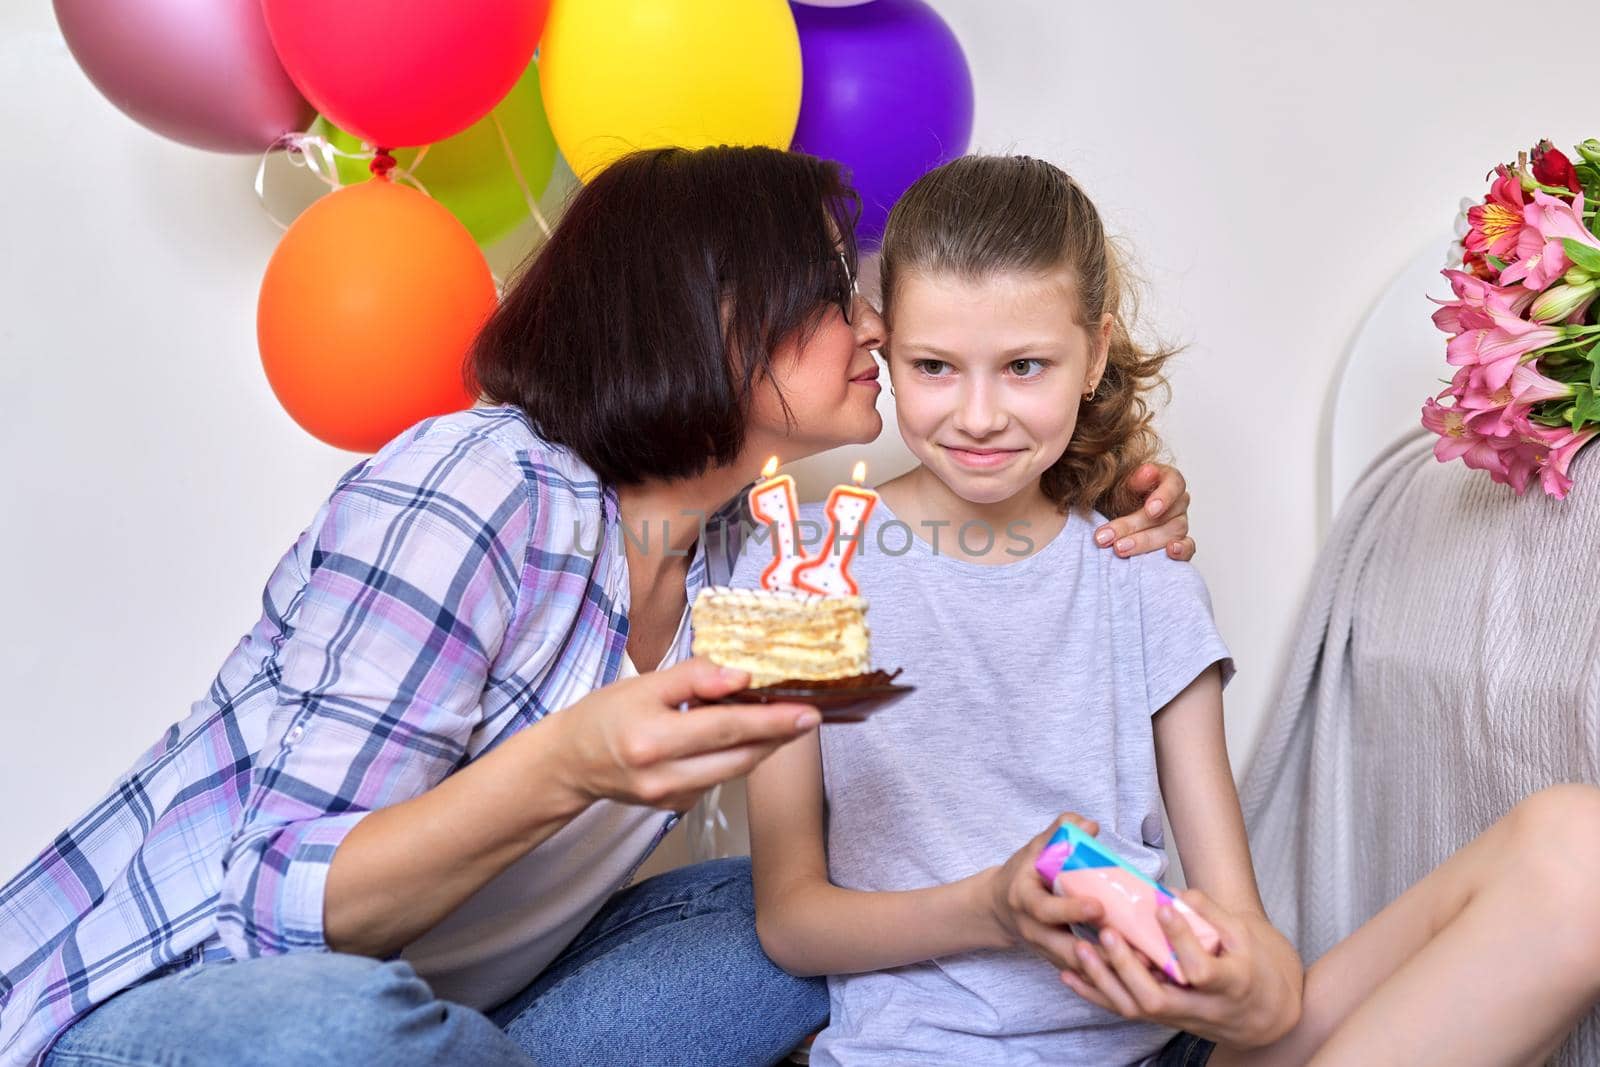 Mom and daughter with birthday cake with candles, gift, balloons by VH-studio